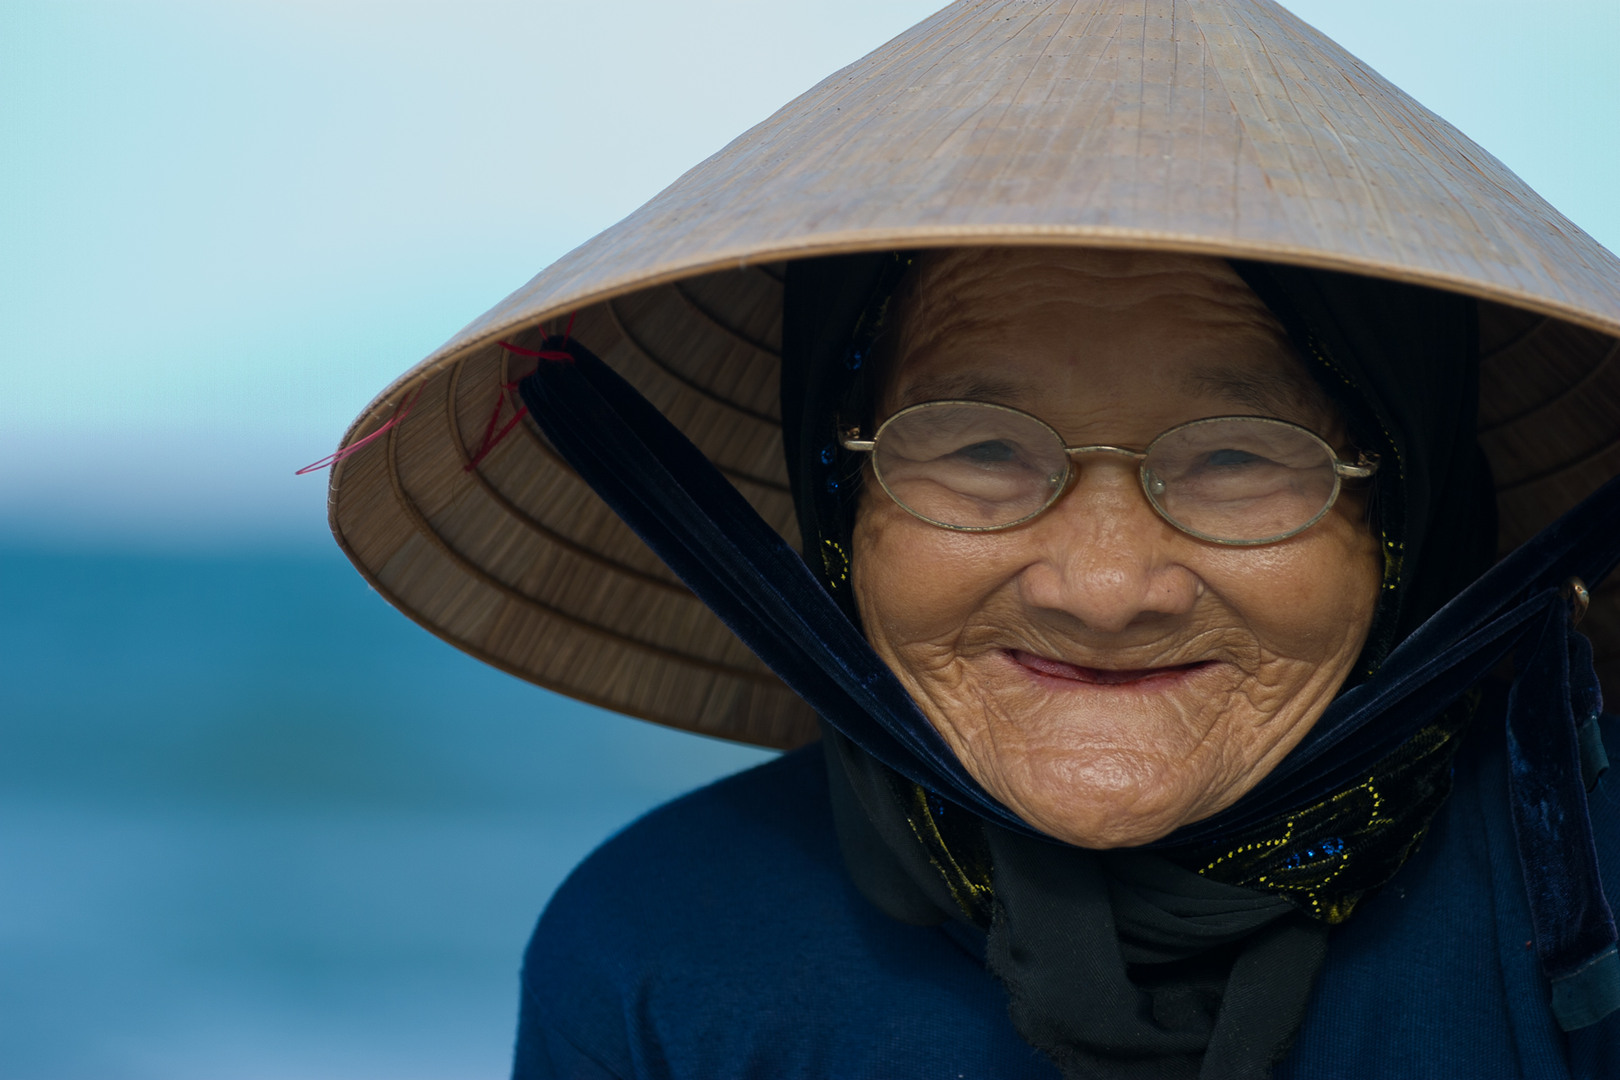 Old Asian Face Porn - Asian smiling old lady - Asian